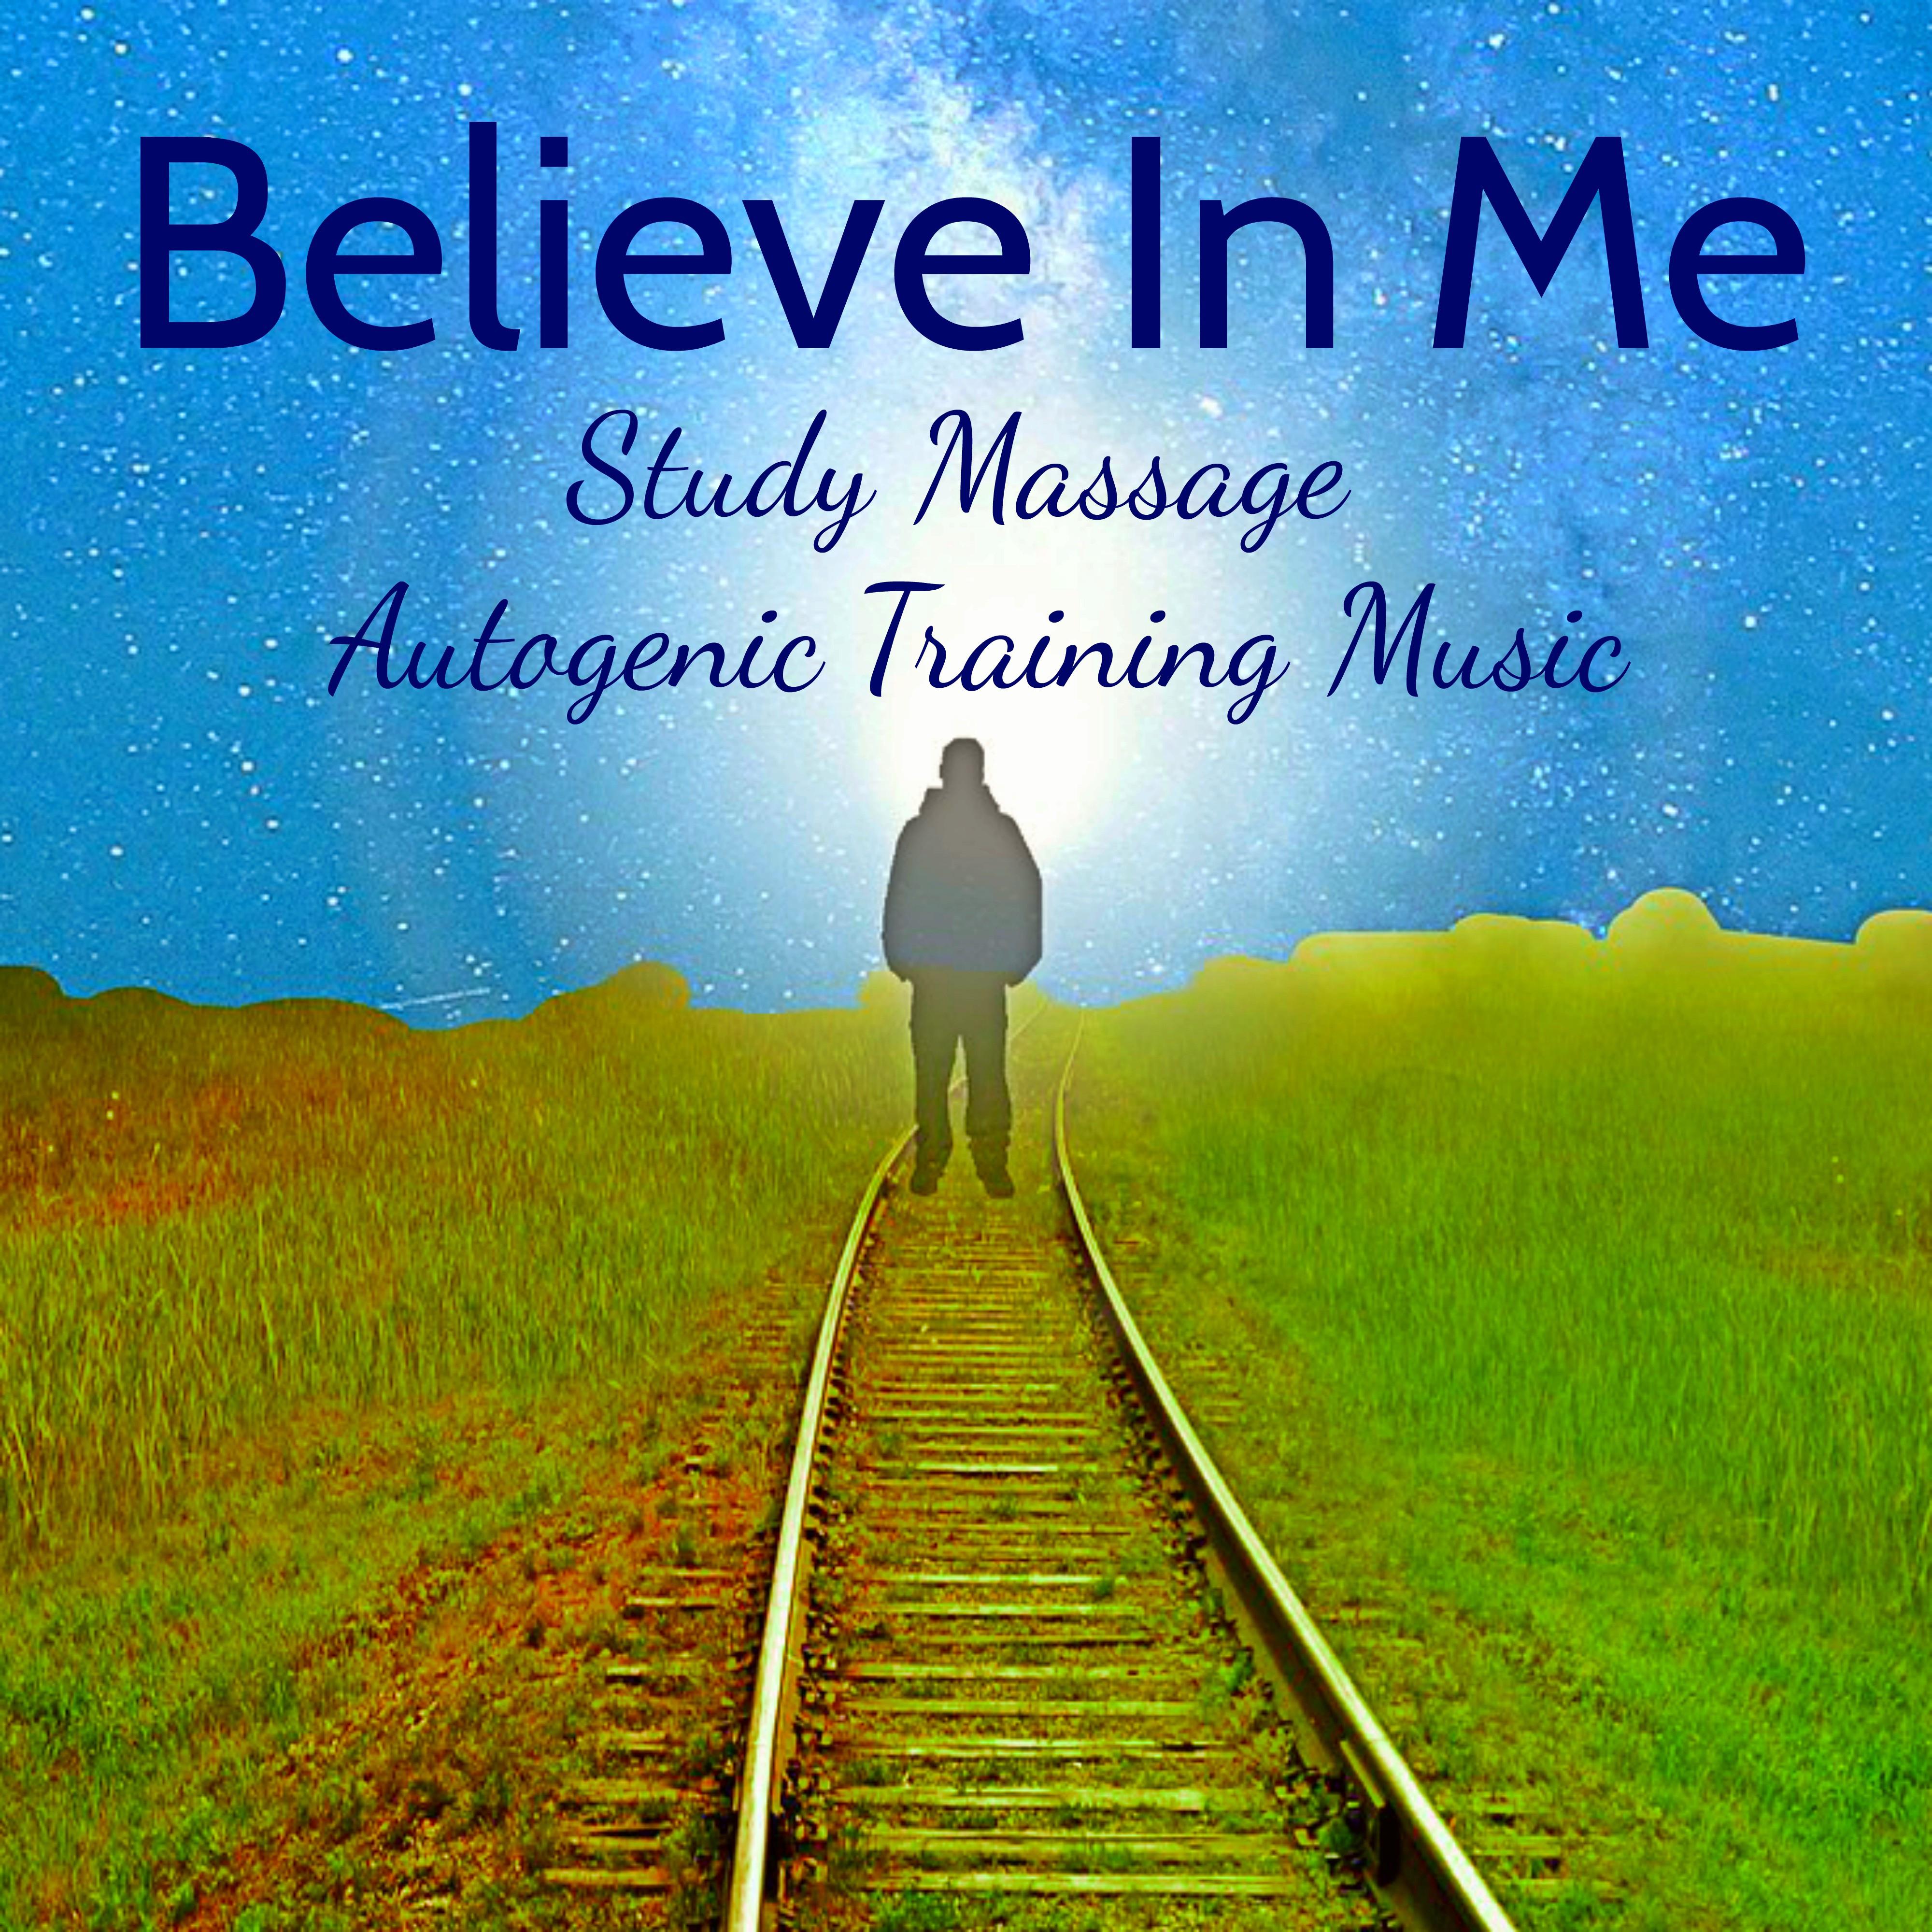 Believe In Me - Study Massage Autogenic Training Music for Best Relaxation Mental Exercise Chakra Balancing with New Age Nature Instrumental Sounds